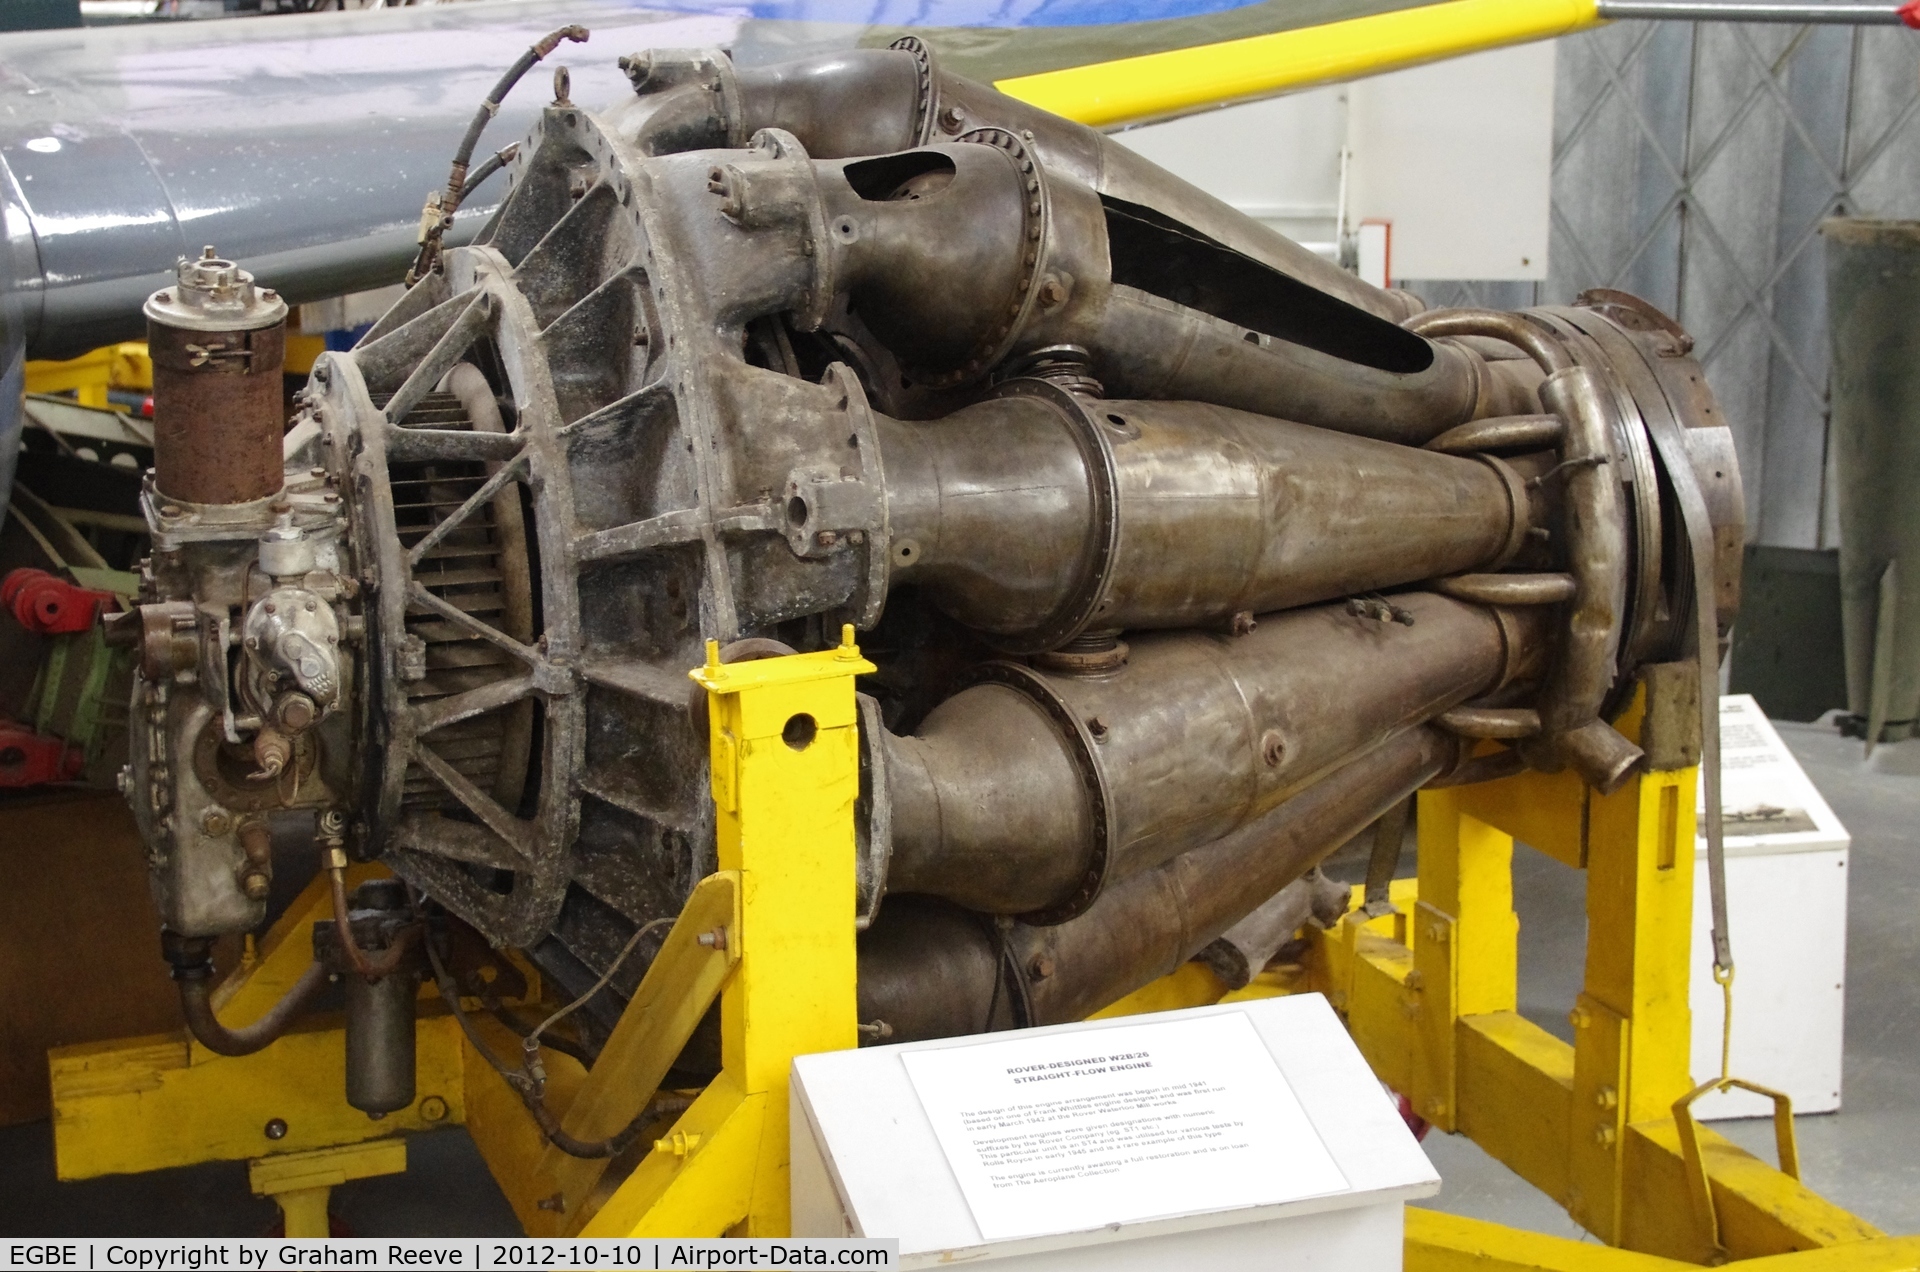 Coventry Airport, Coventry, England United Kingdom (EGBE) - Rover desiigned W2B/26 straight flow engine preserved at the Midland Air Museum.